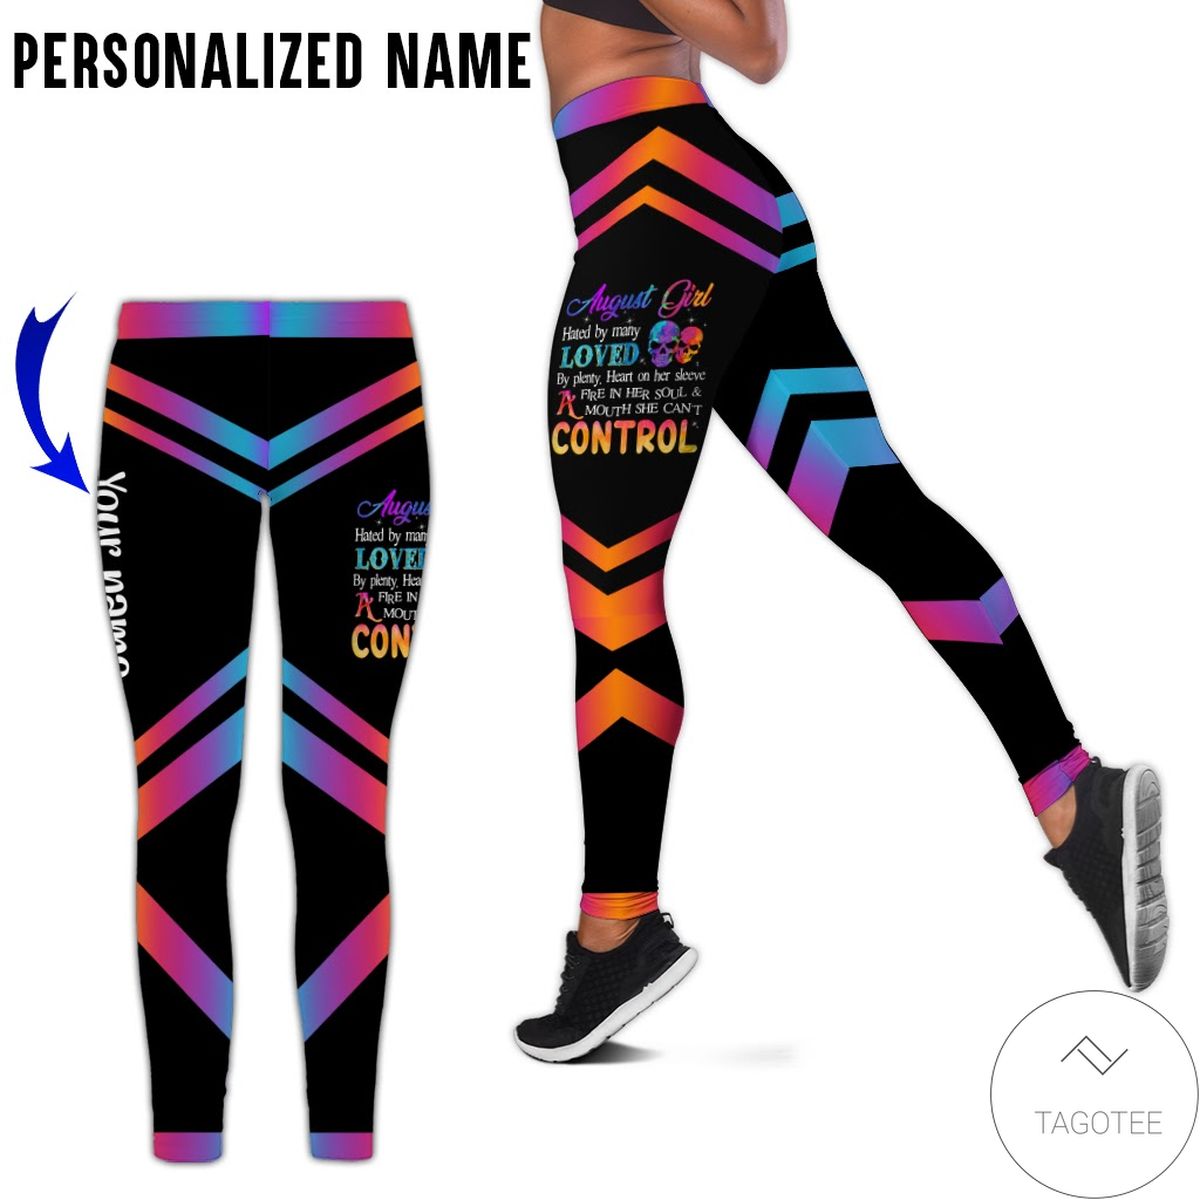 Personalized August Girl Hated By Many A Fire In Her Soul And Mouth She Can't Control Leggings